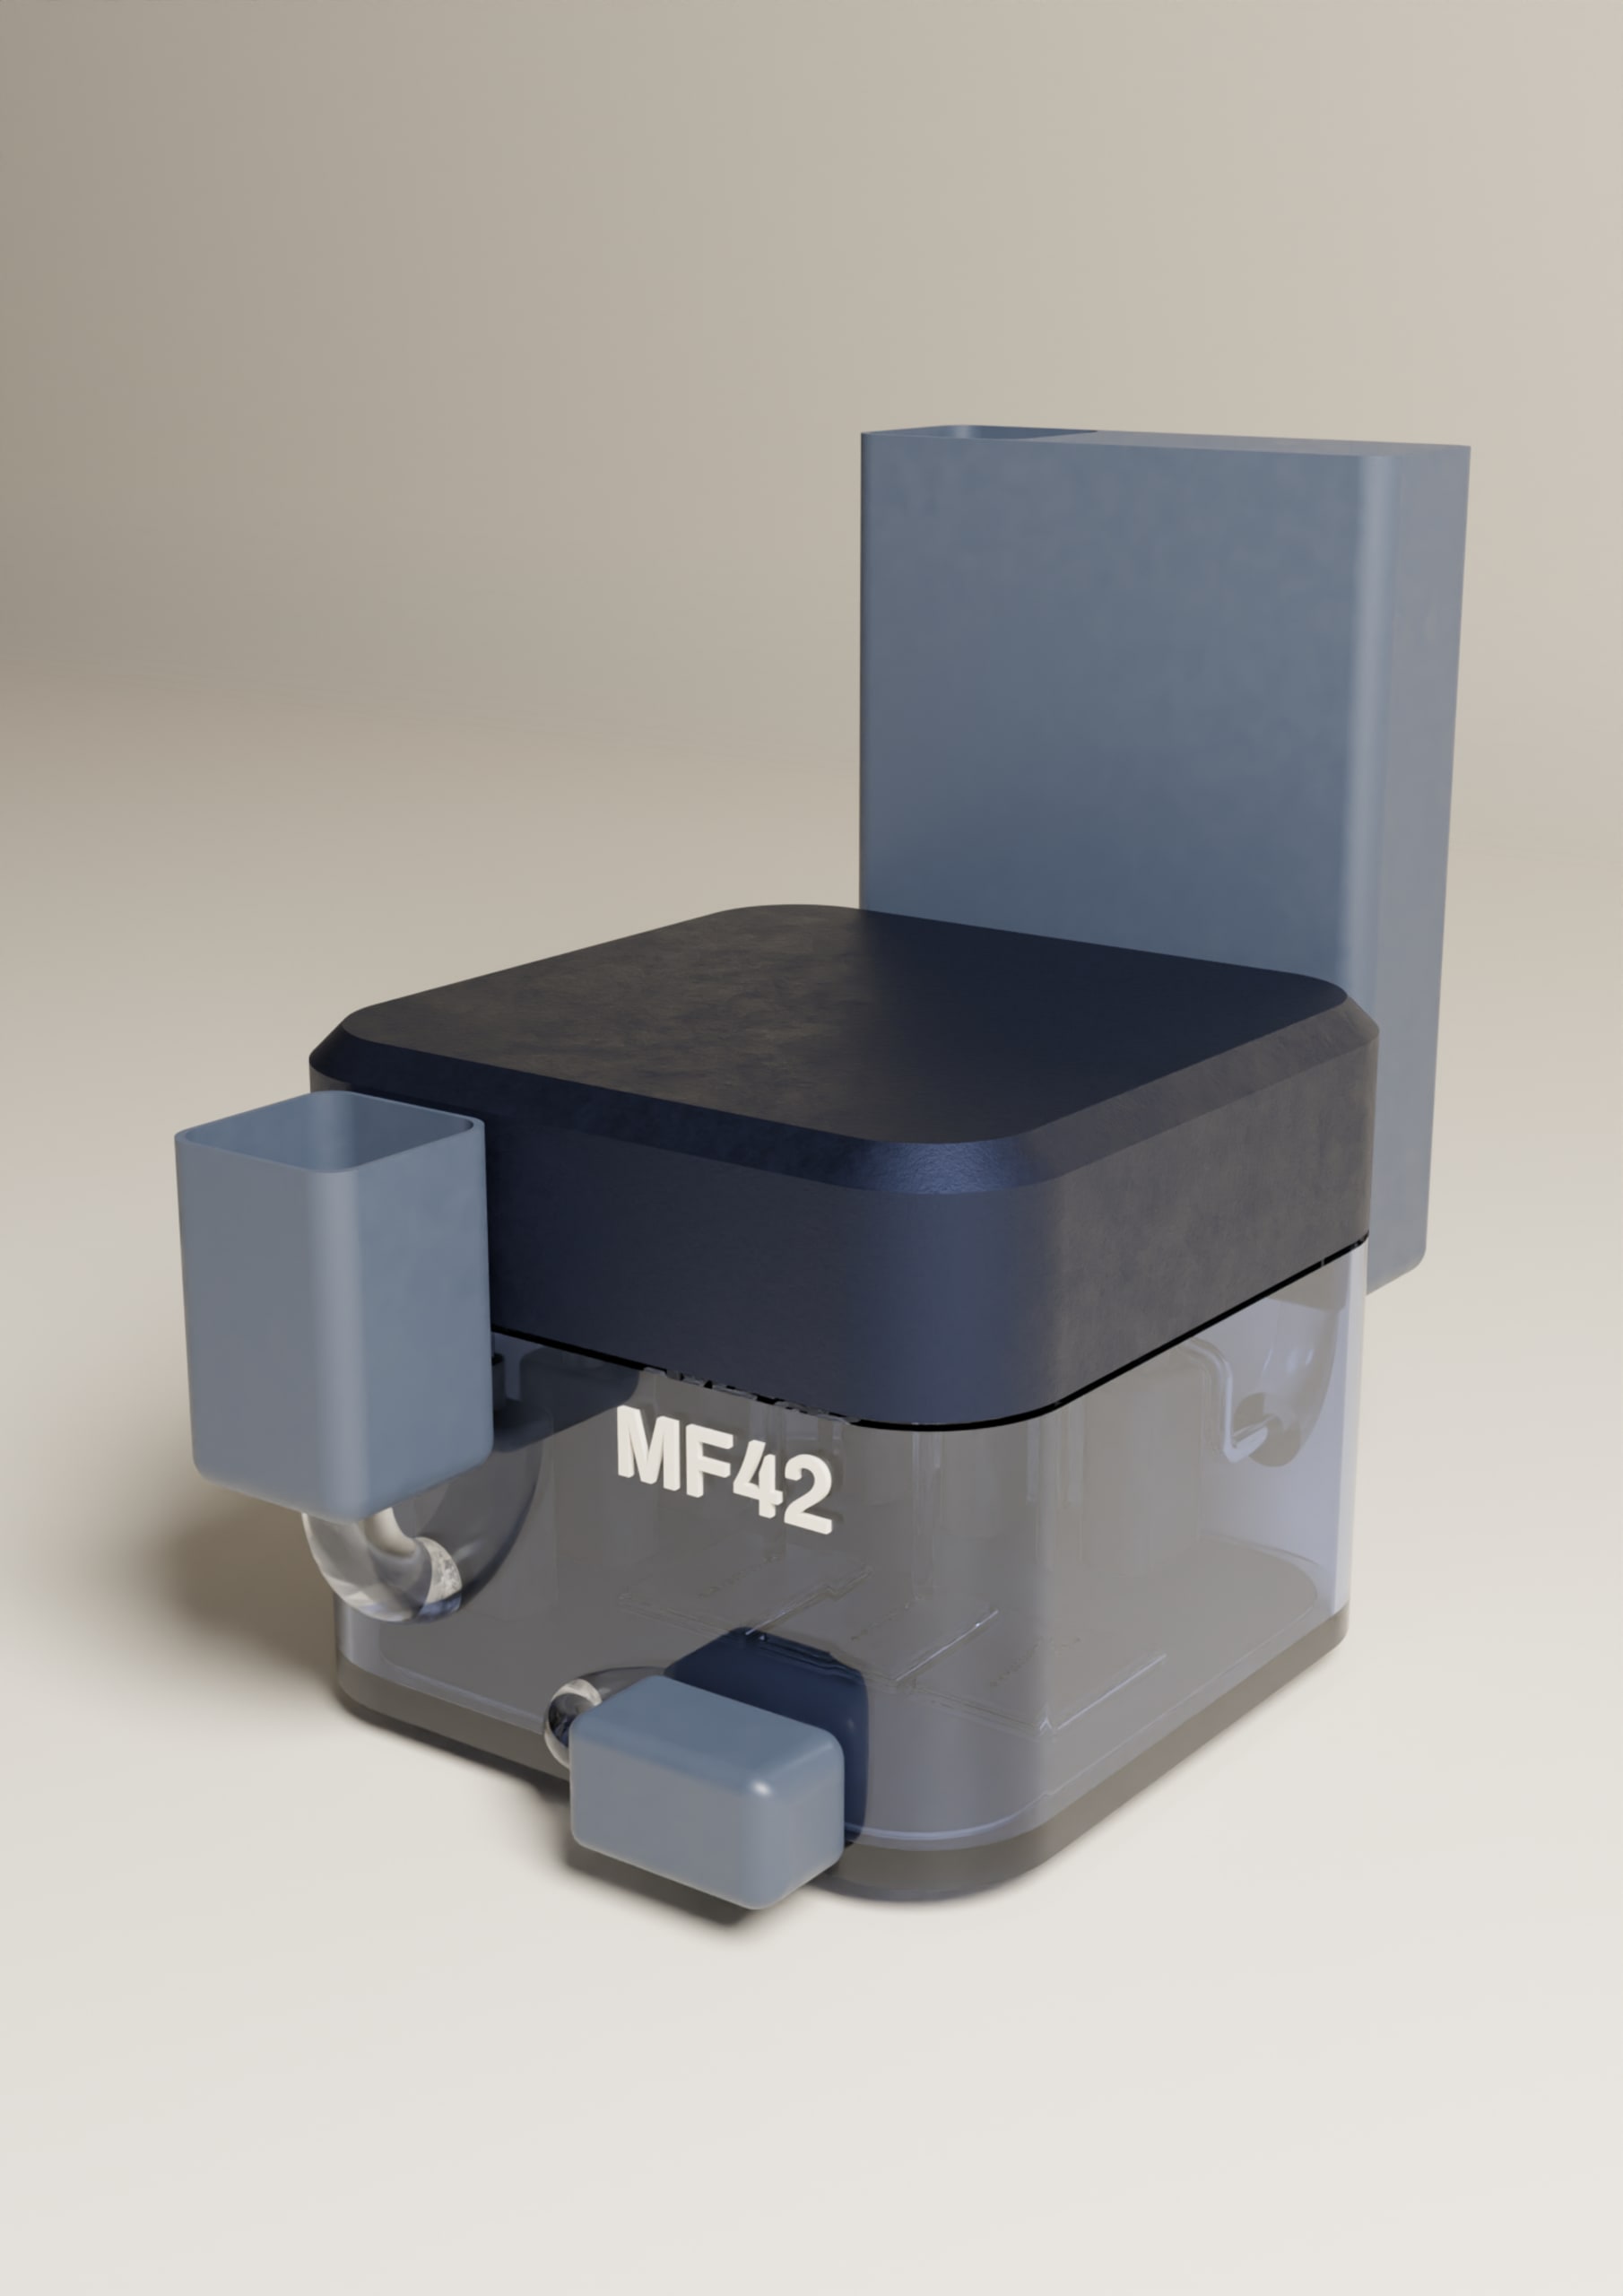 MF42 device render, translucent acrylic body. Peristaltic pumps, and MF42 device render, lid closed.